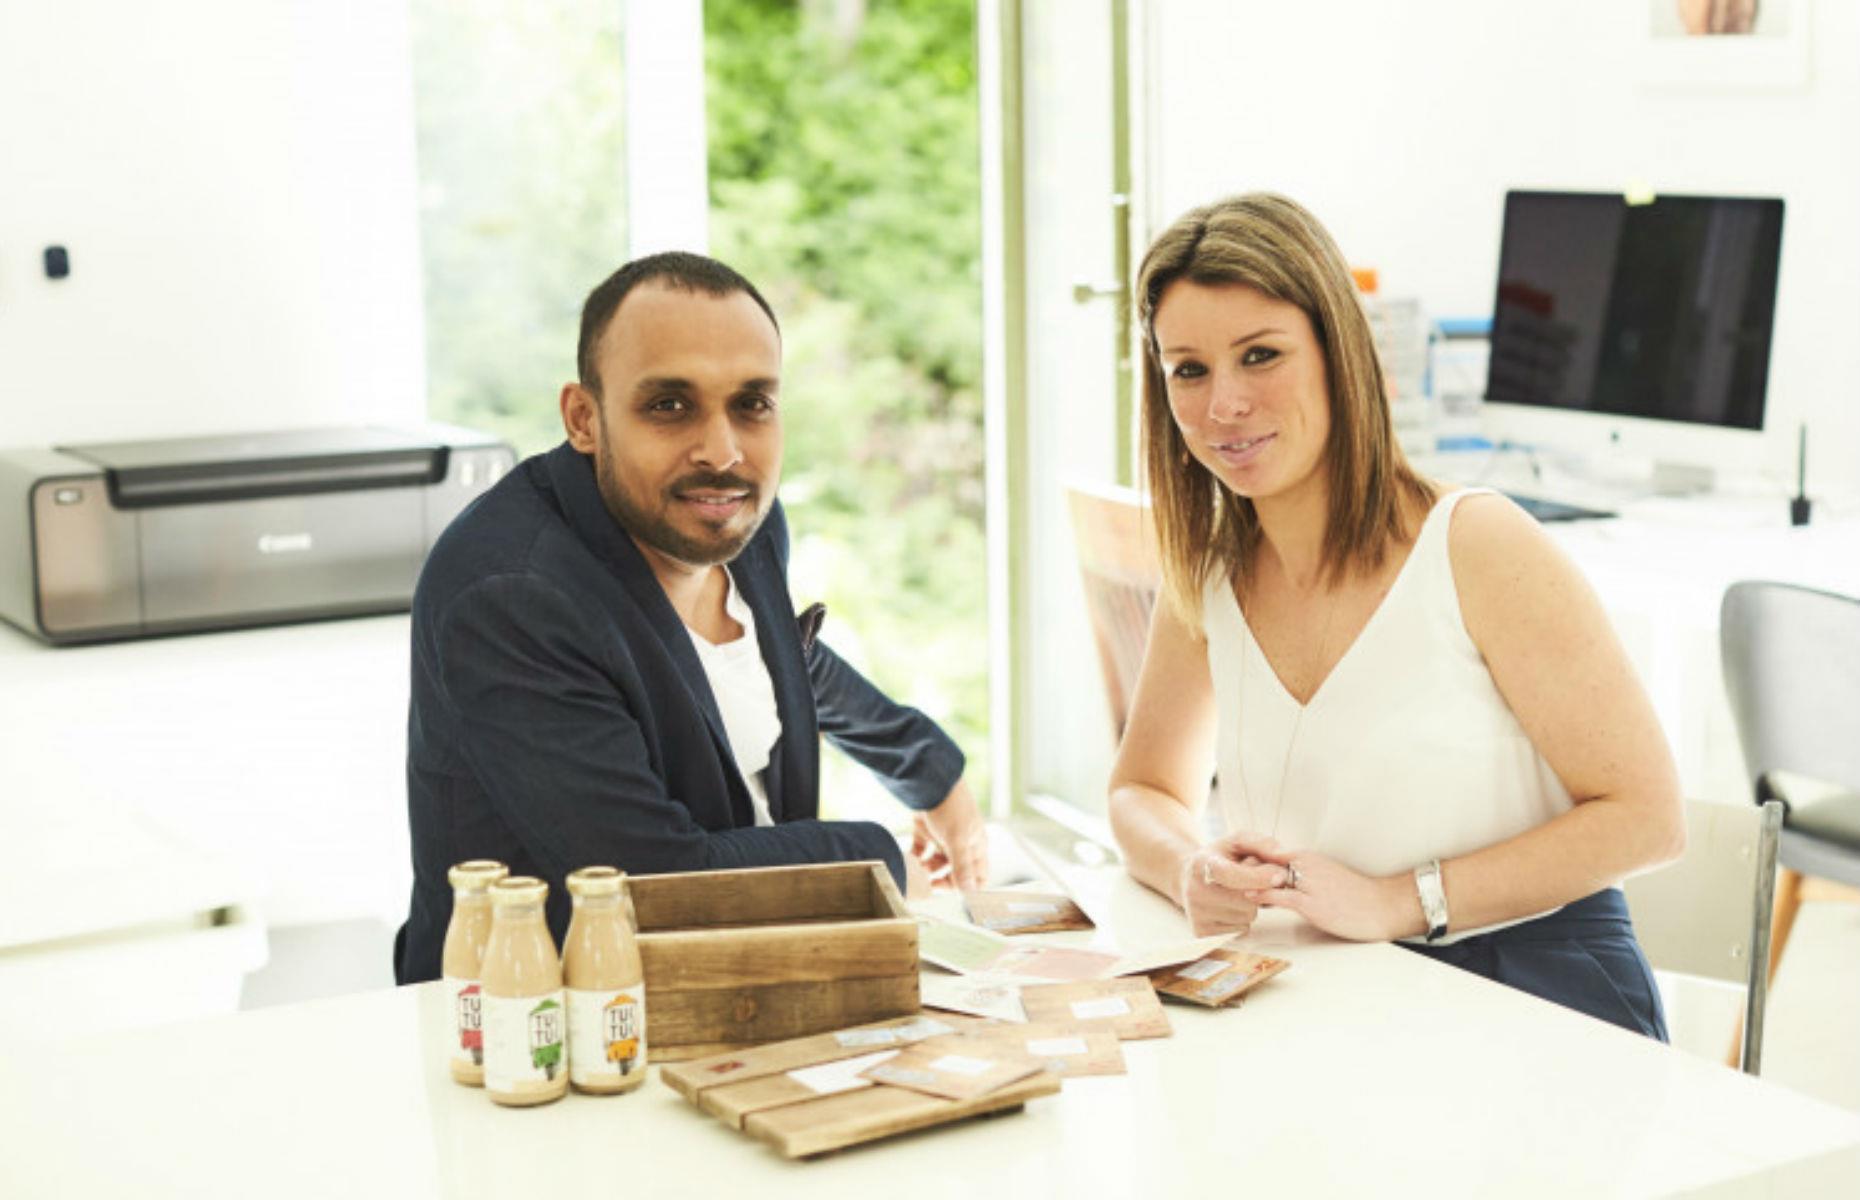 Rupesh with his wife Alexandra in their office